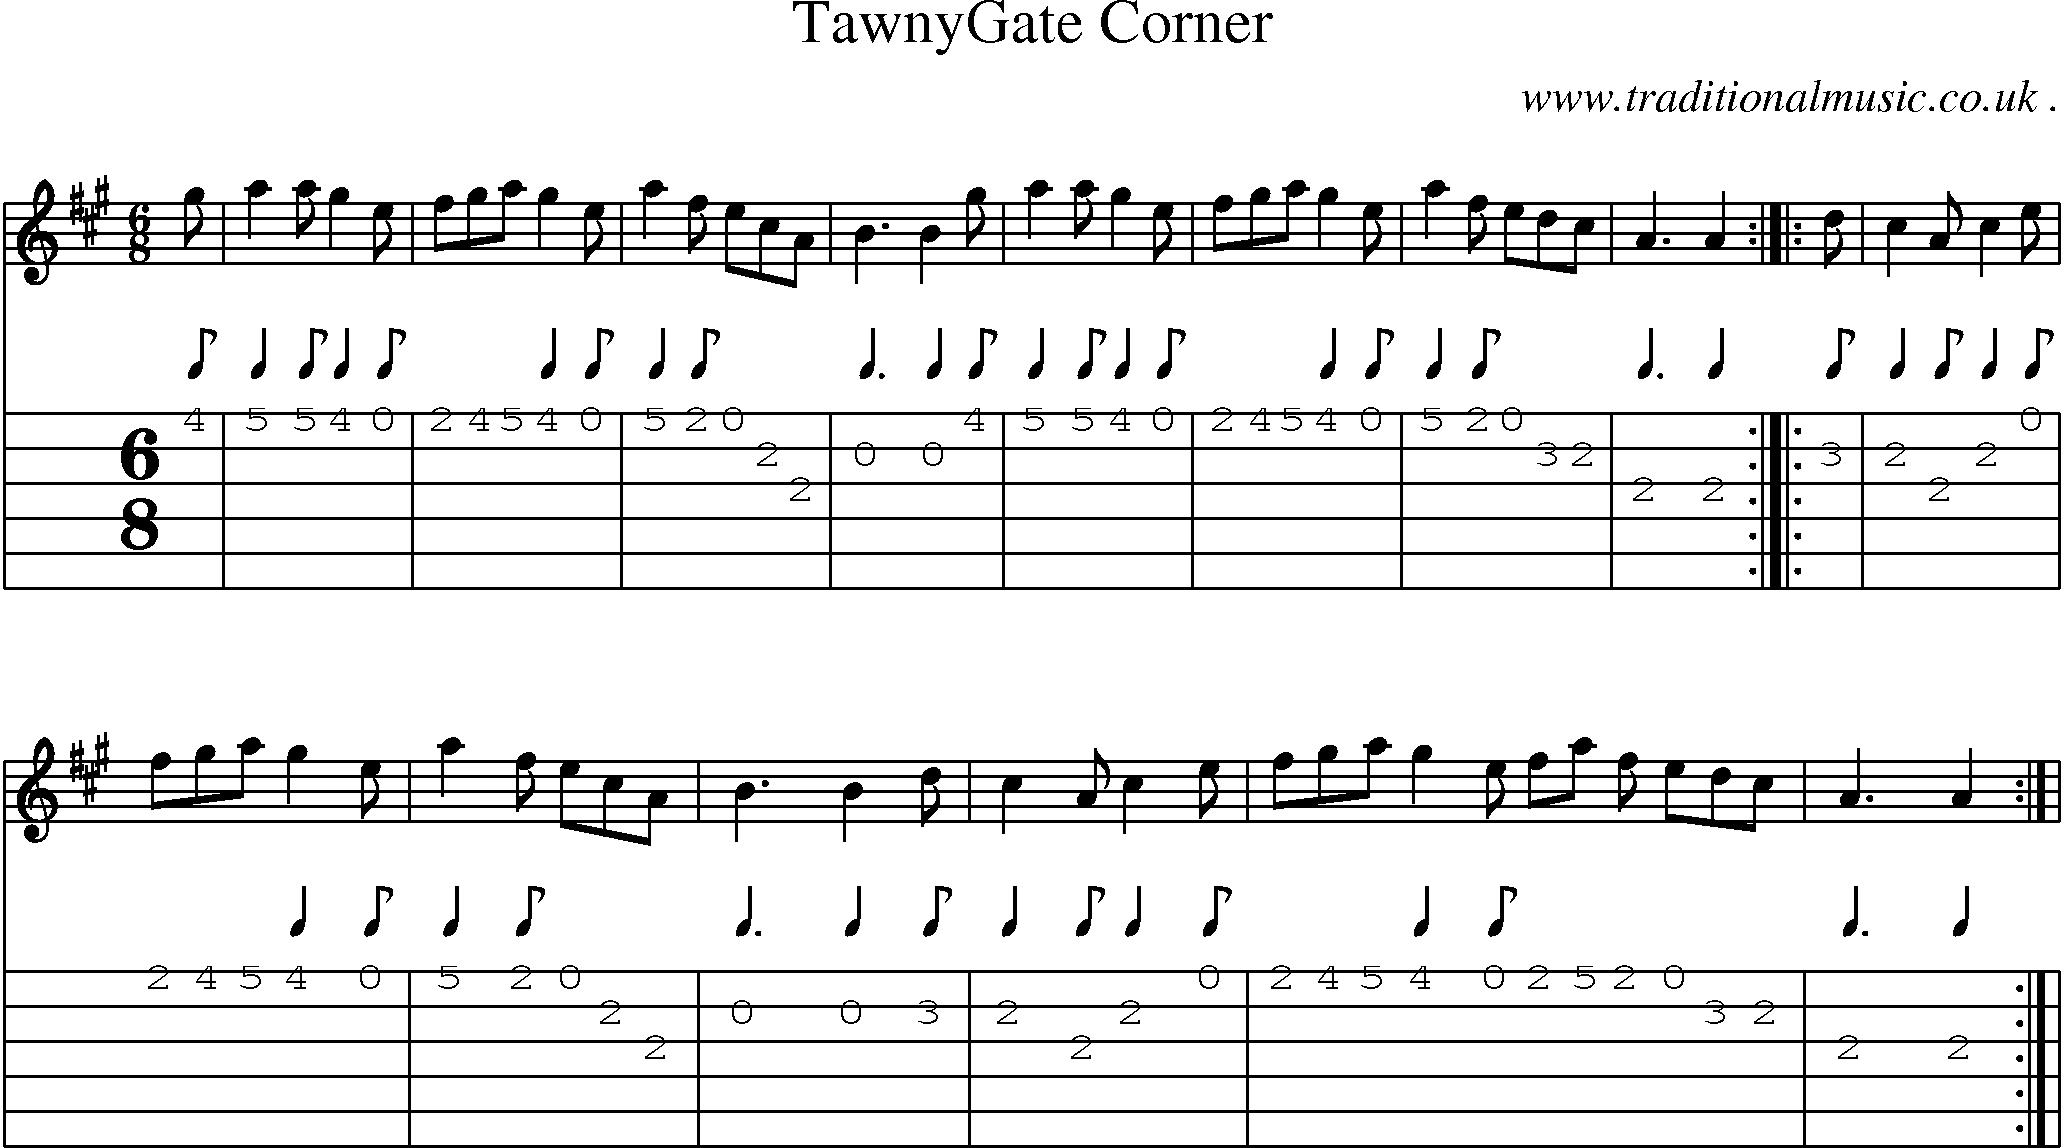 Sheet-Music and Guitar Tabs for Tawnygate Corner